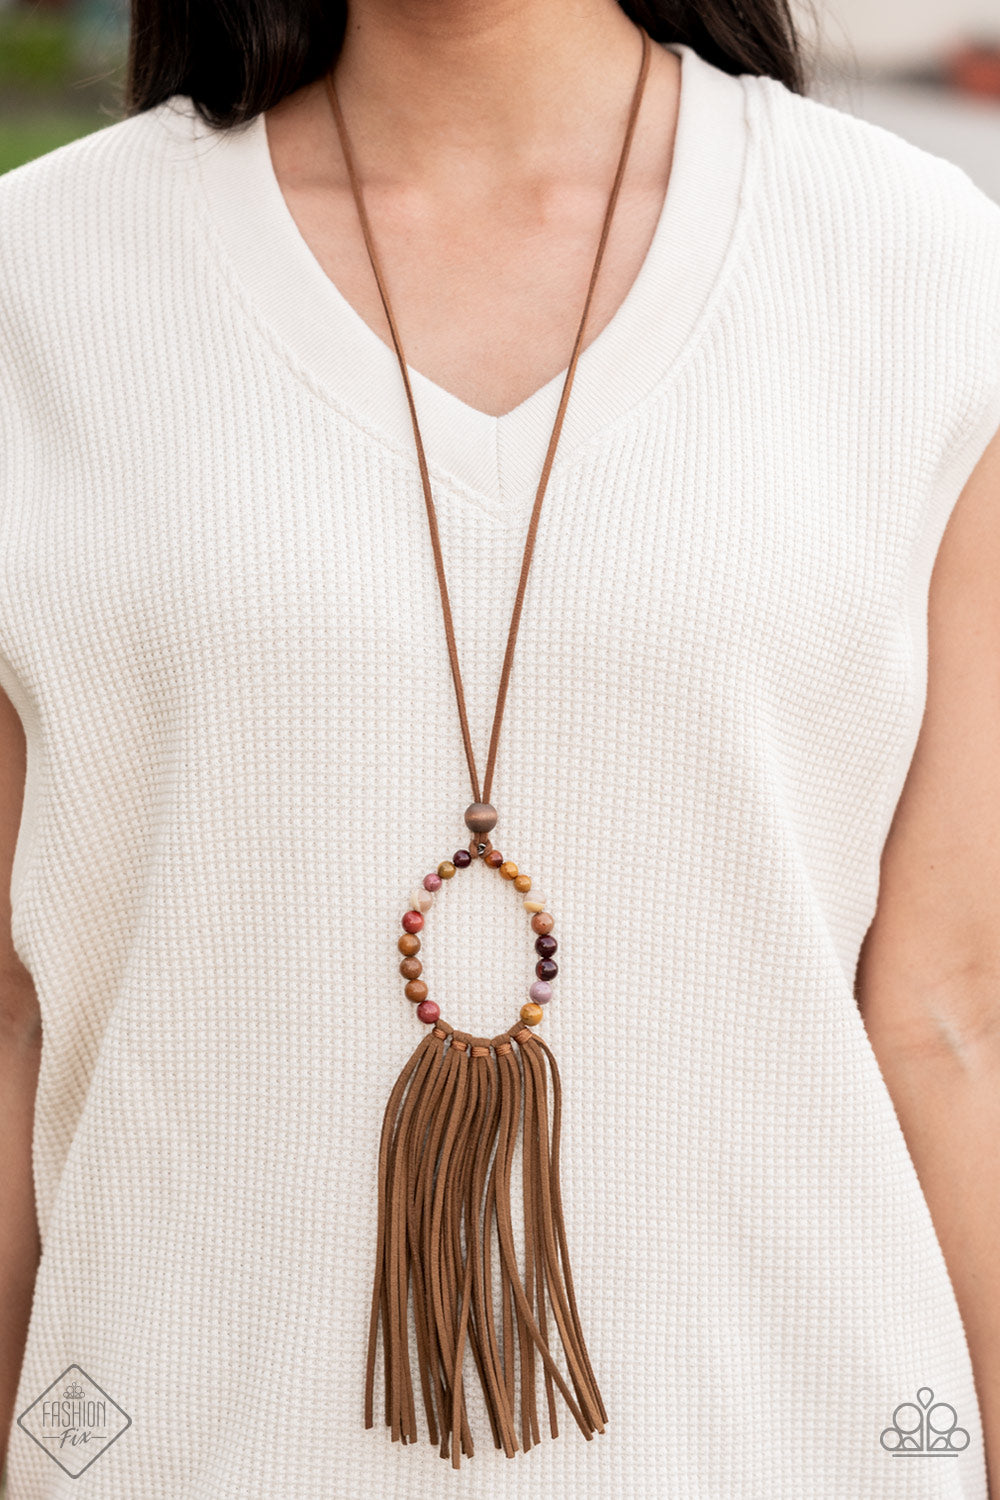 Namaste Mama - Multi Stone Bead Necklaces - Paparazzi Accessories a collection of earthy multicolored stone beads are threaded around a wire hoop that is fastened at the end of a lengthened brown suede cord. The earthy stones make way for a foxy fringe of brown suede that sways from the bottom of the hoop, resulting in a rustic down-to-earth vibe. Features an adjustable clasp closure.